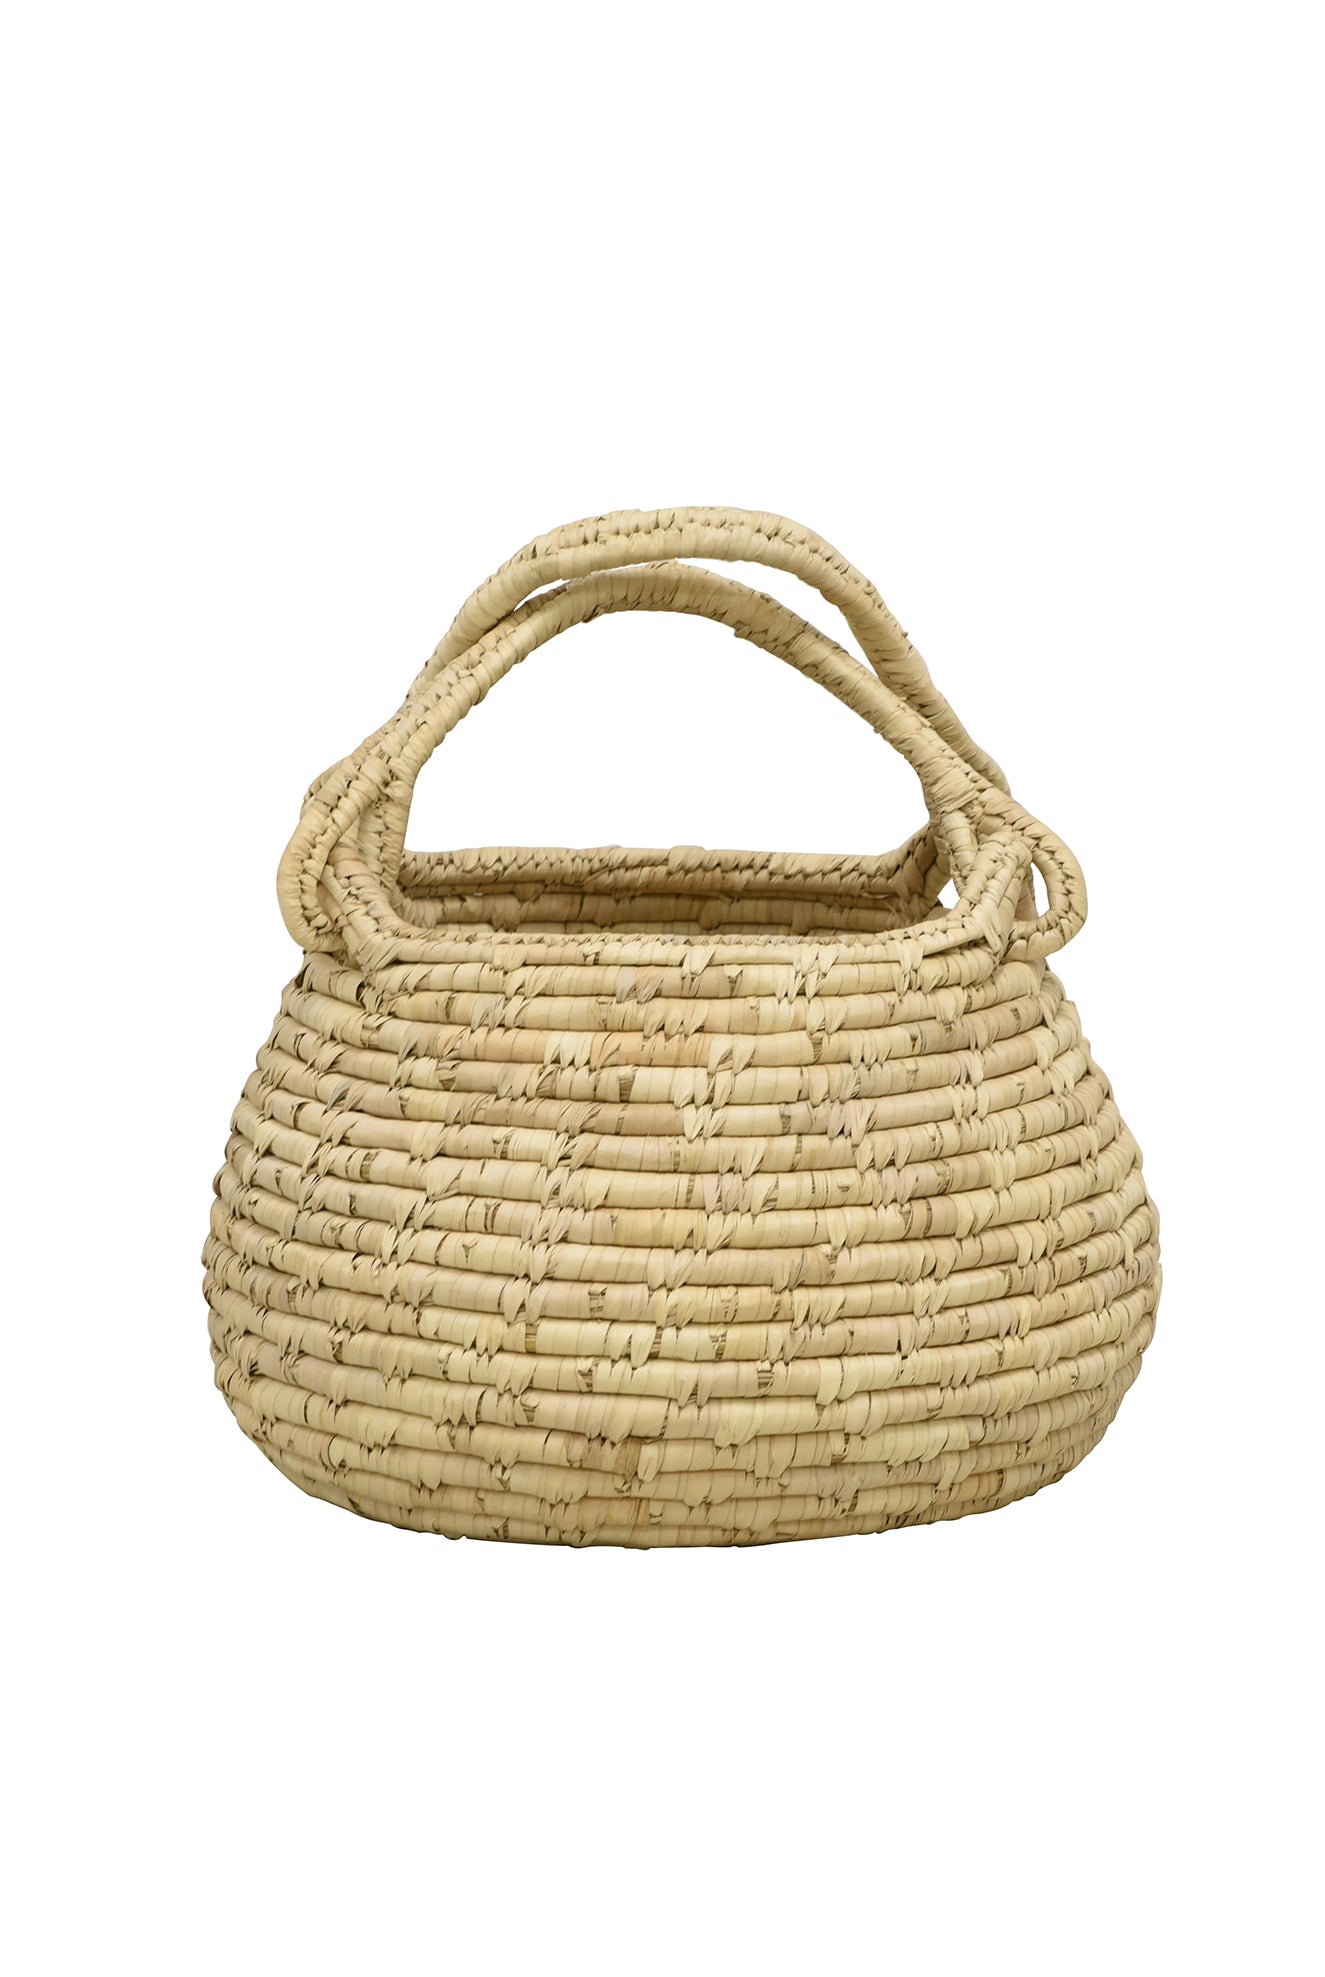 Round Palm Leaf Summer Basket with Handle - Magpie Style